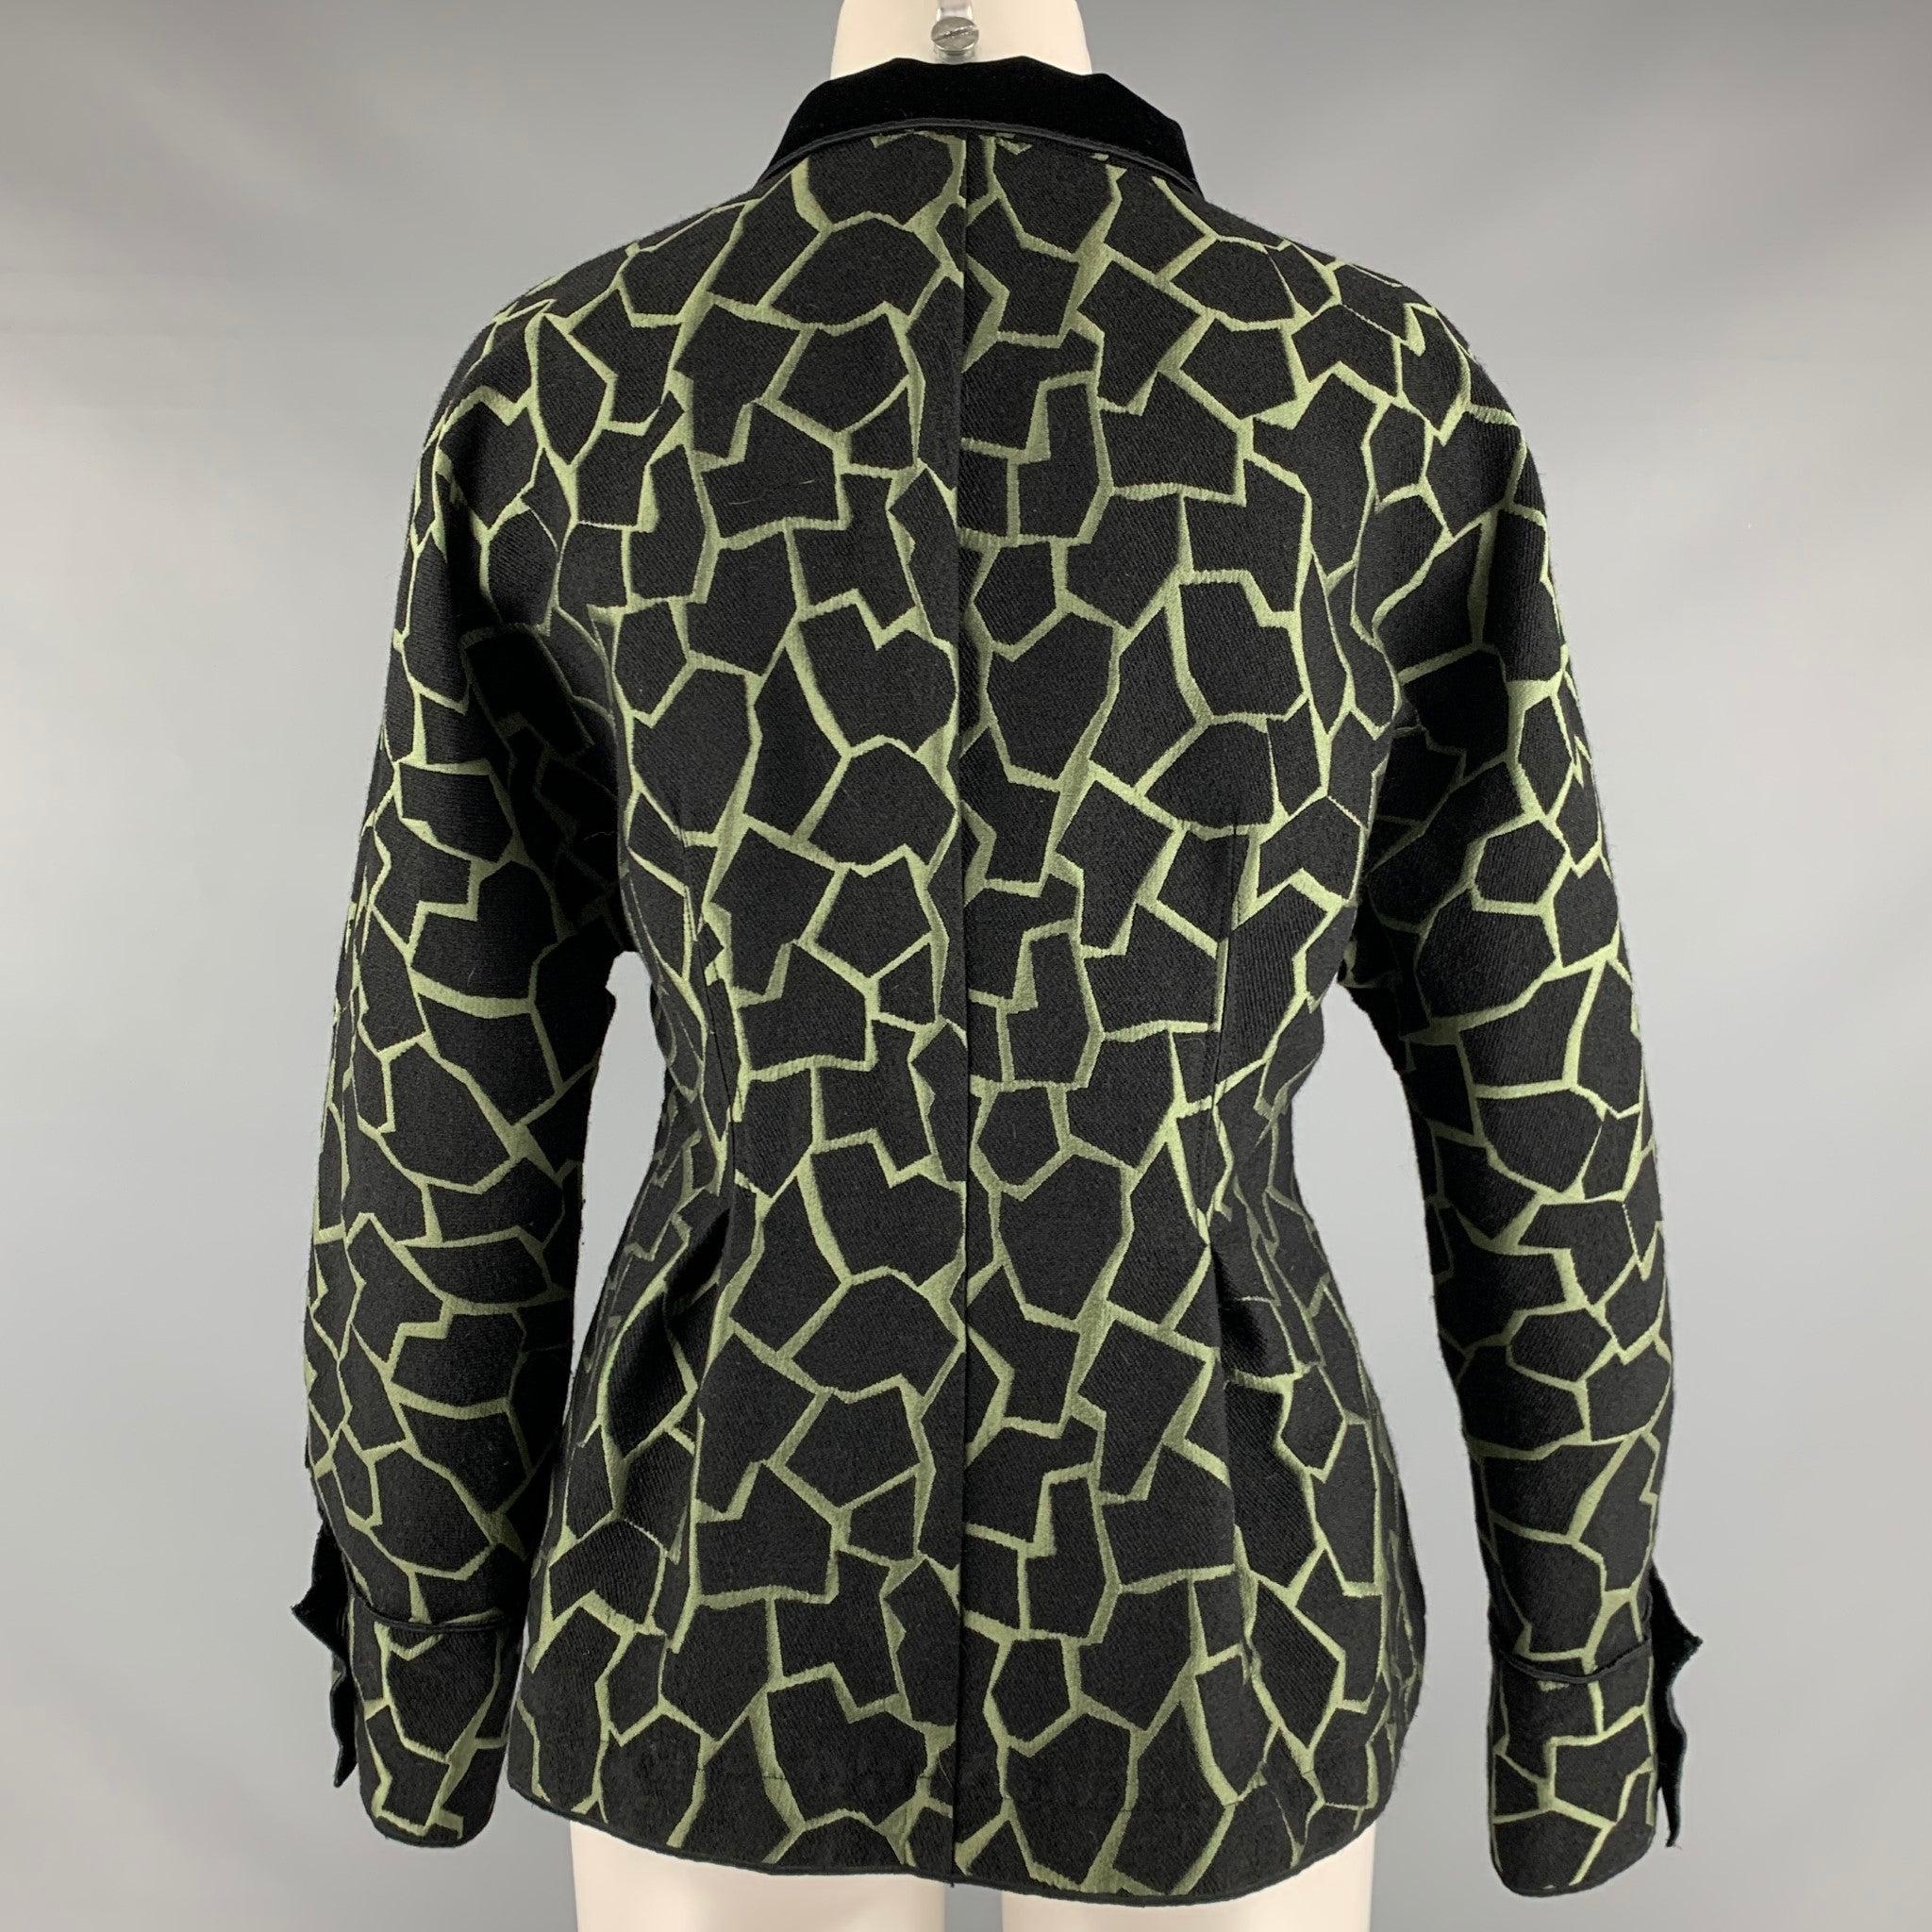 EMPORIO ARMANI Size 8 Black Green Acrylic Blend Jacquard Jacket In Good Condition For Sale In San Francisco, CA